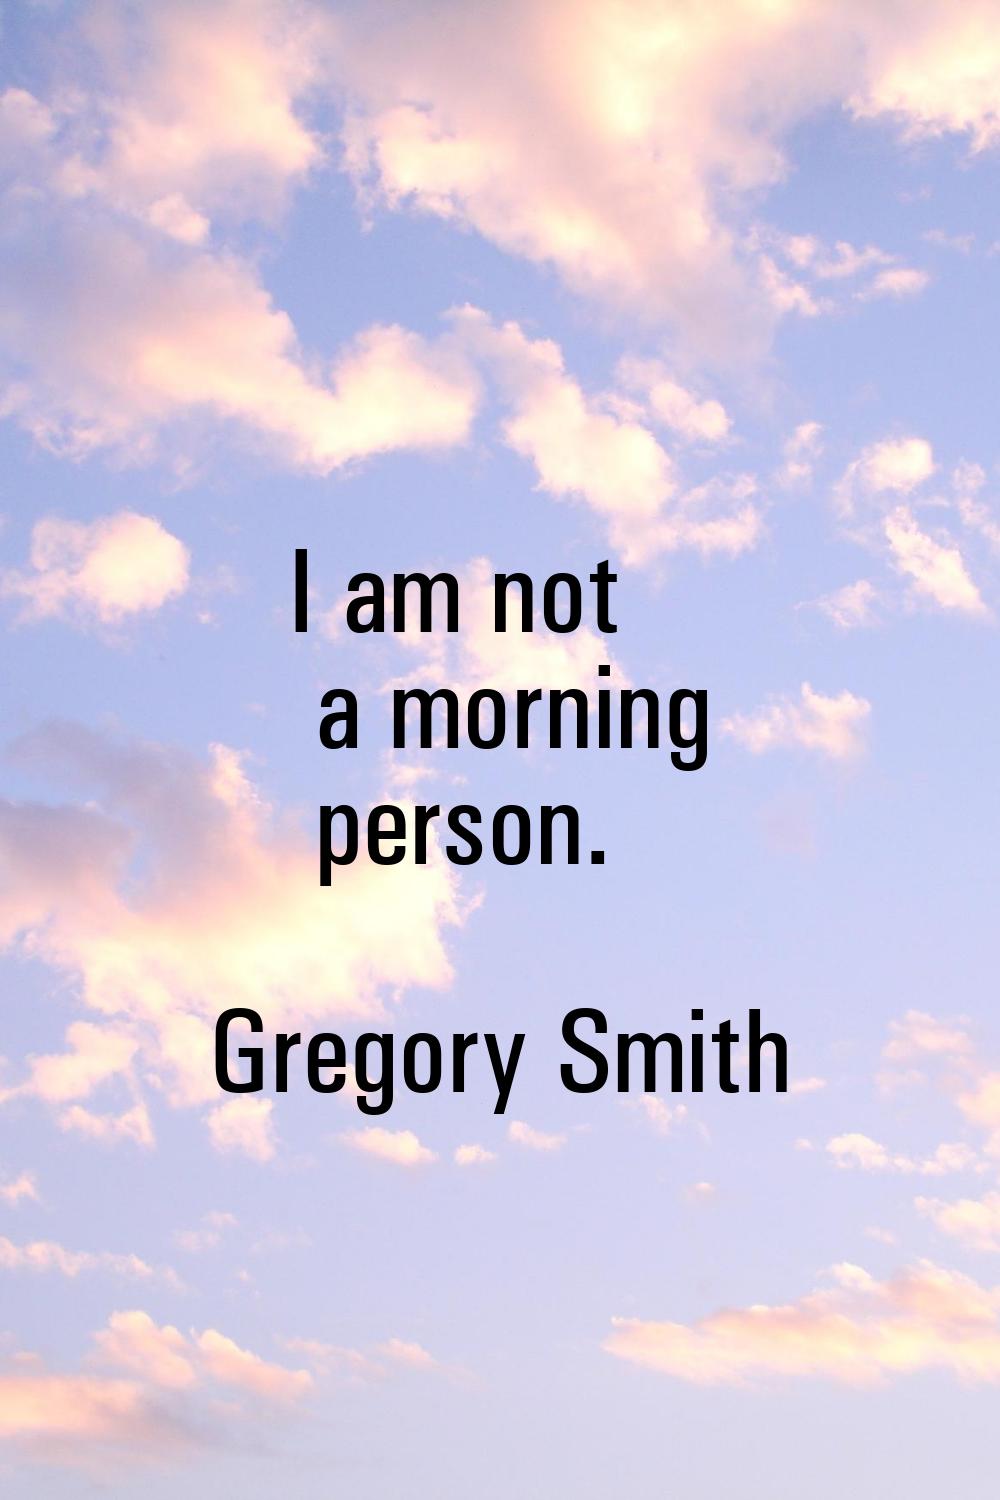 I am not a morning person.